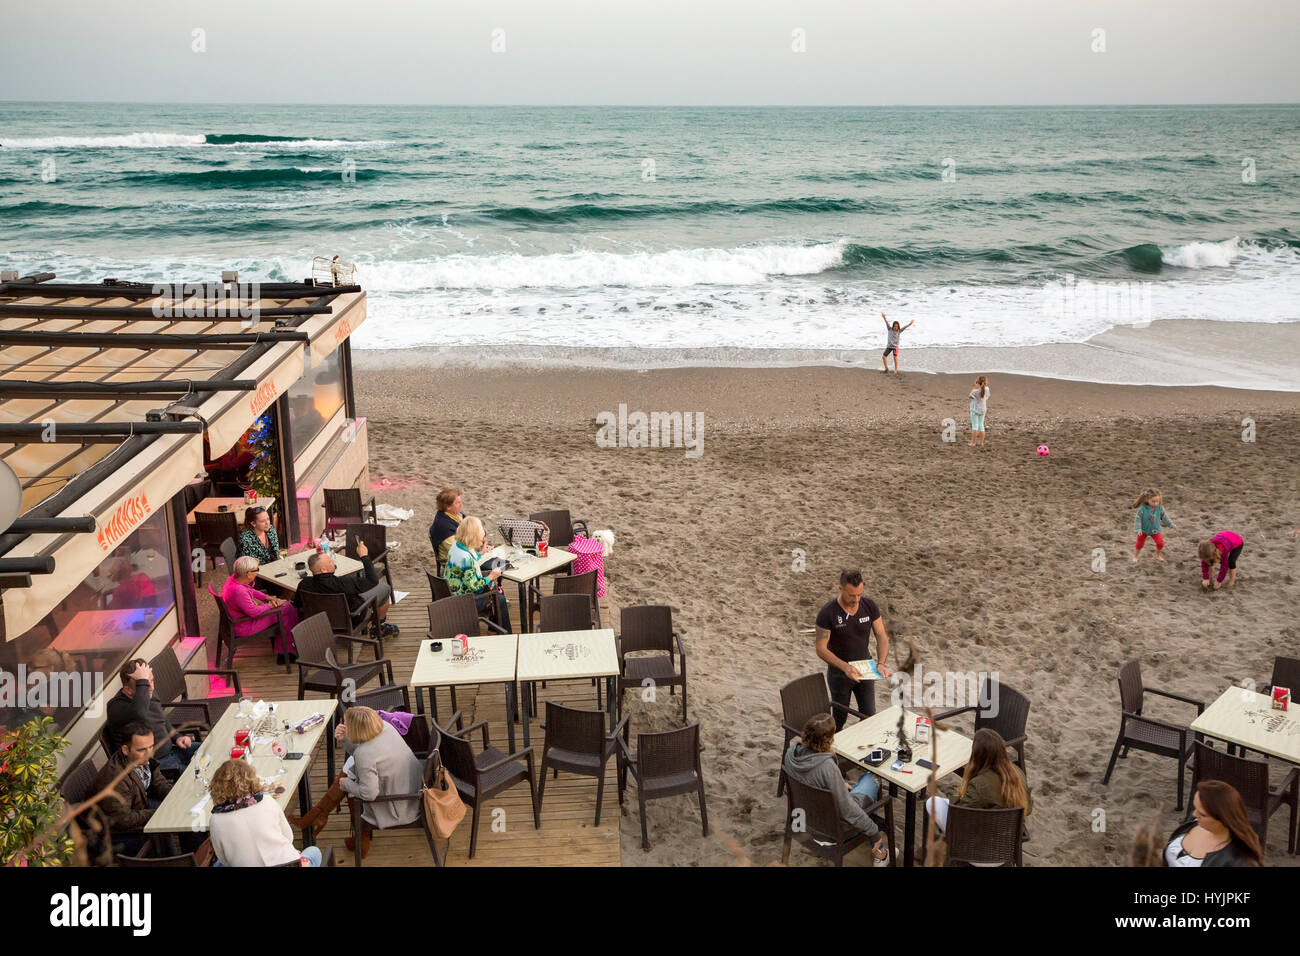 Typical chiringuito. Beach restaurant at sunset, Benalmadena. Malaga province Costa del Sol. Andalusia Southern Spain, Europe Stock Photo